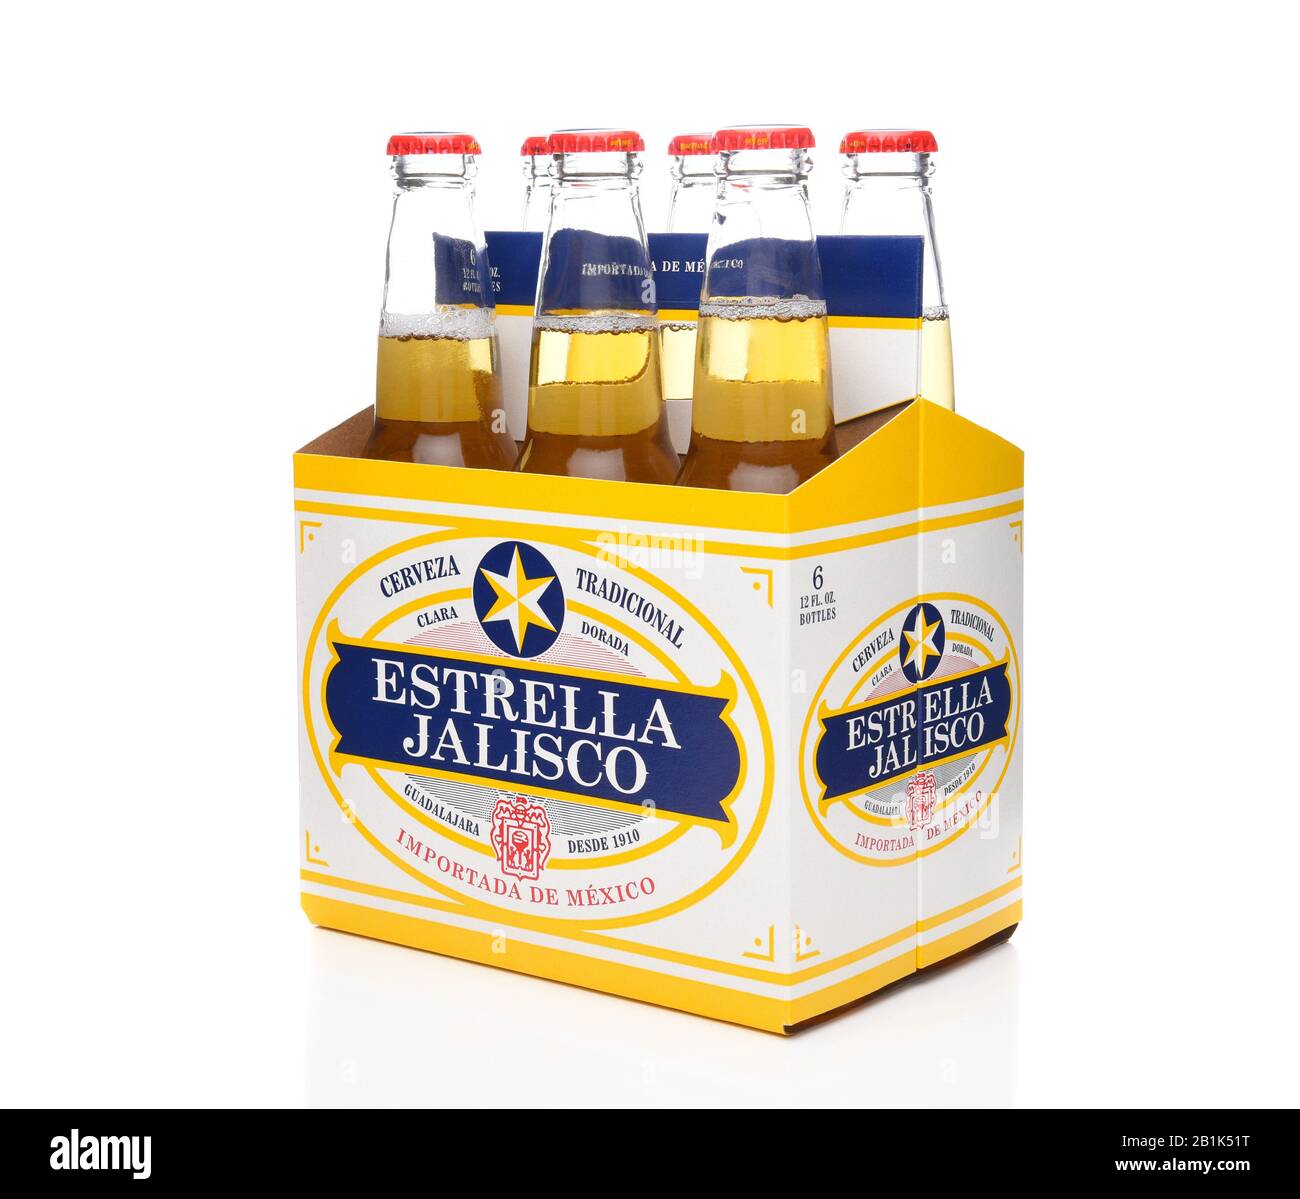 IRVINE, CALIFORNIA - MARCH 21, 2018: Six pack of Estrella Jalisco Beer side end view. Estrella Jalisco is a American Lager style beer brewed by Grupo Stock Photo